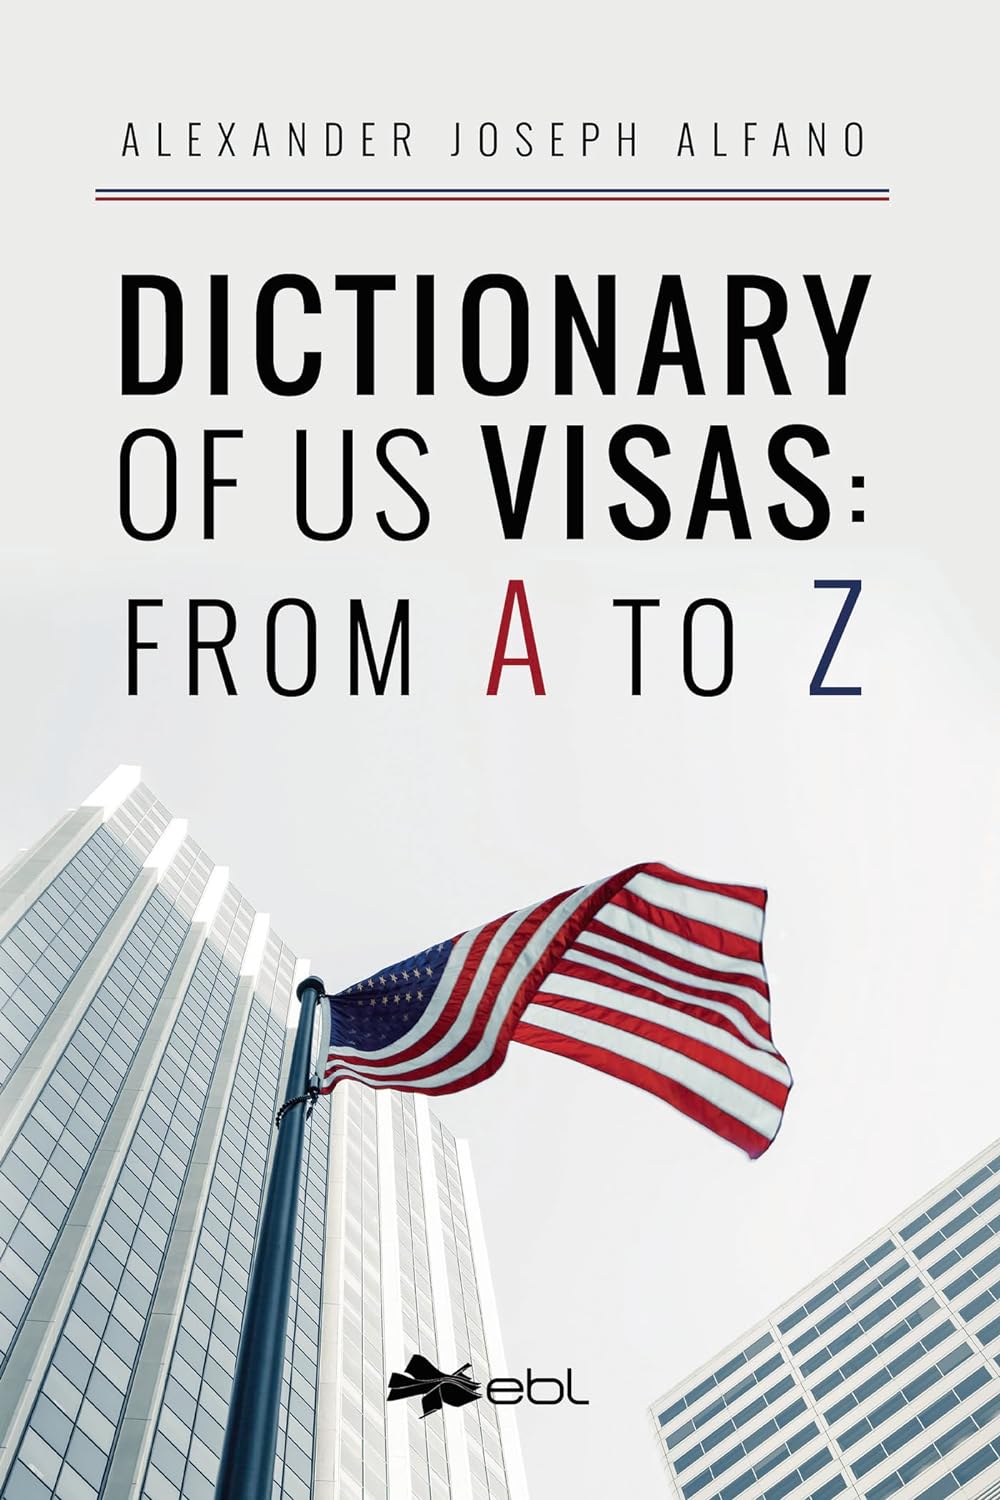 Book Dictionary of US Visas From A to Z by Alexander Joseph Alfano